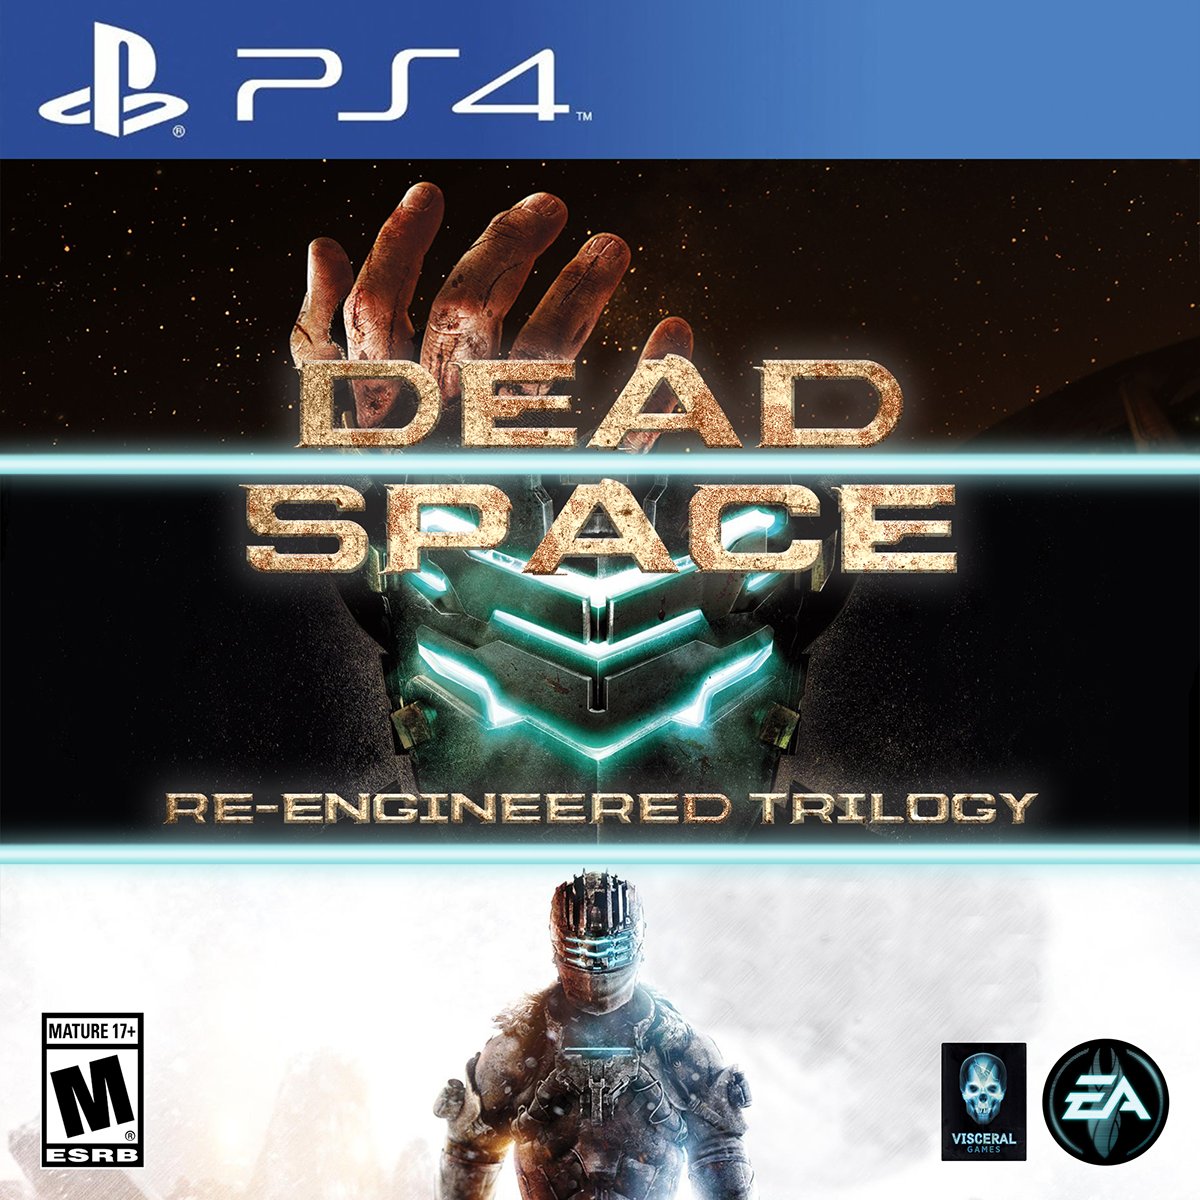 𝐑𝐮𝐥𝐞𝐓𝐢𝐦𝐞 on X: Rumors are floating around that we might get some Dead  Space news next week! Does this mean a possible Remaster? 😊   / X